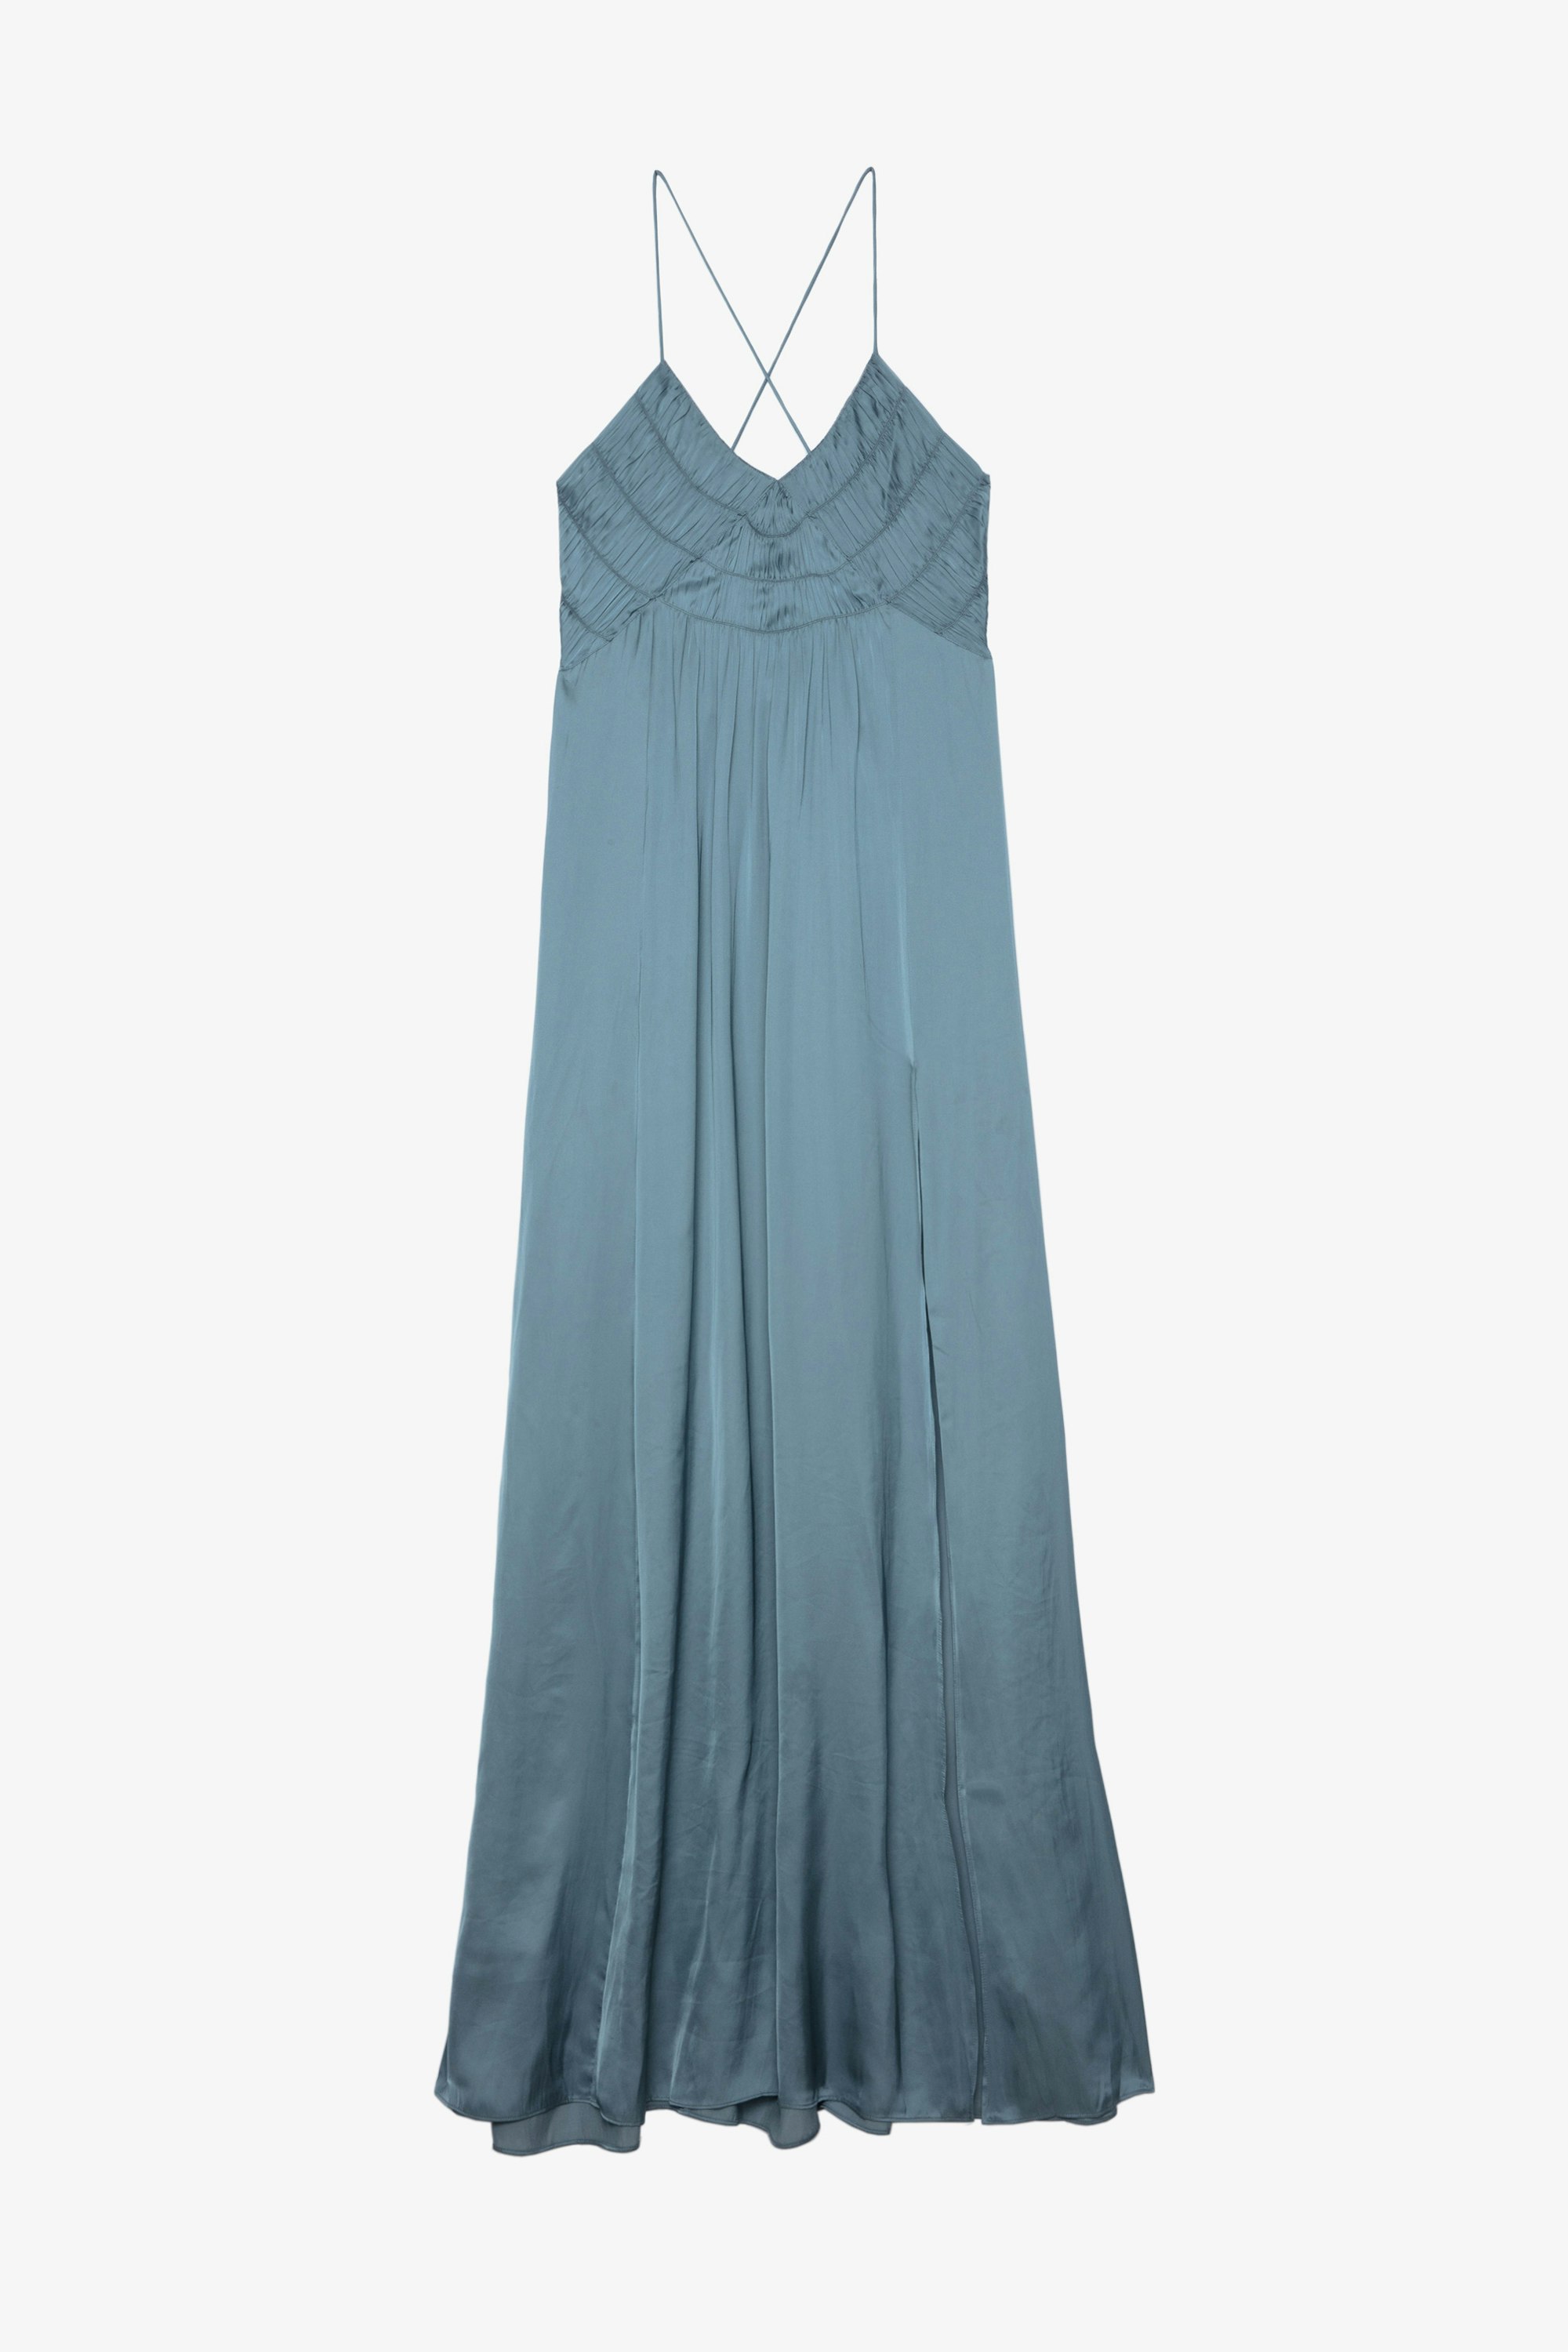 Rayonne Satin Dress Women's long dress in gathered blue satin with thin straps